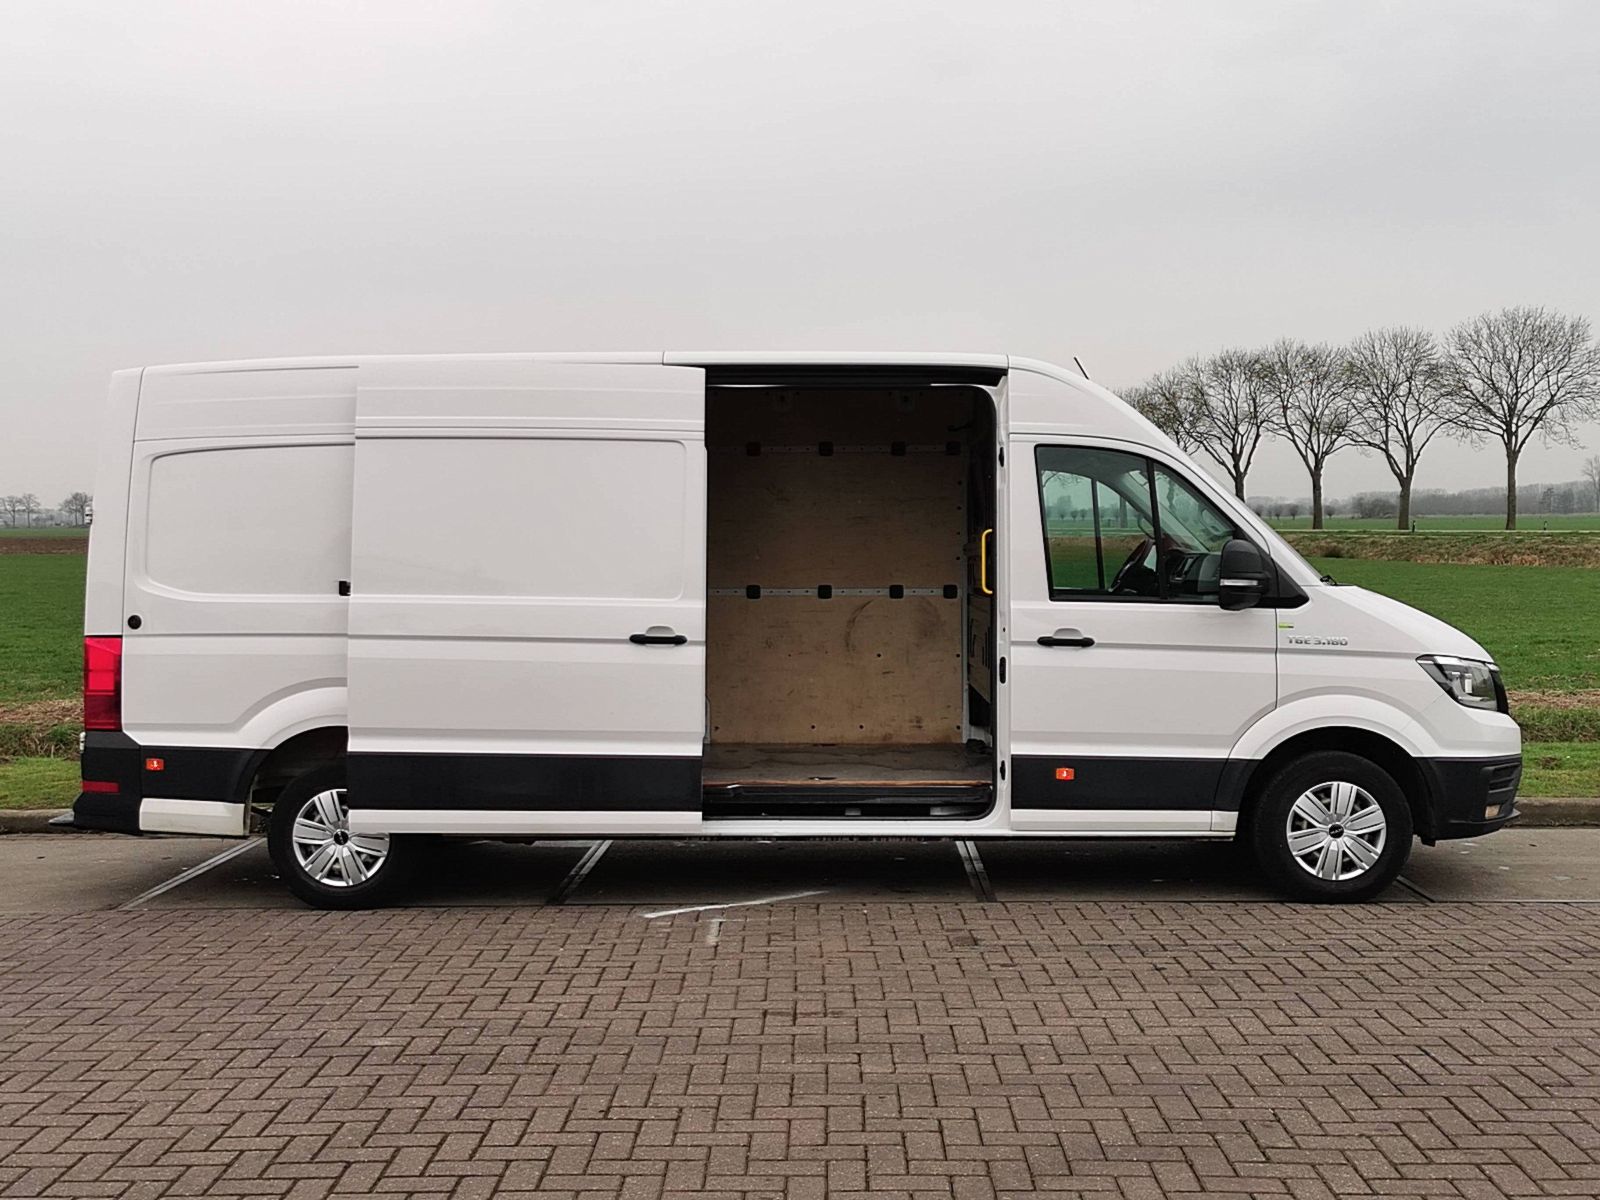 Minibus Volkswagen Crafter/MAN TGE 3.180 Kombi L3H2 LED ACC NAVI from  Germany, 60412 EUR for sale - ID: 7790666